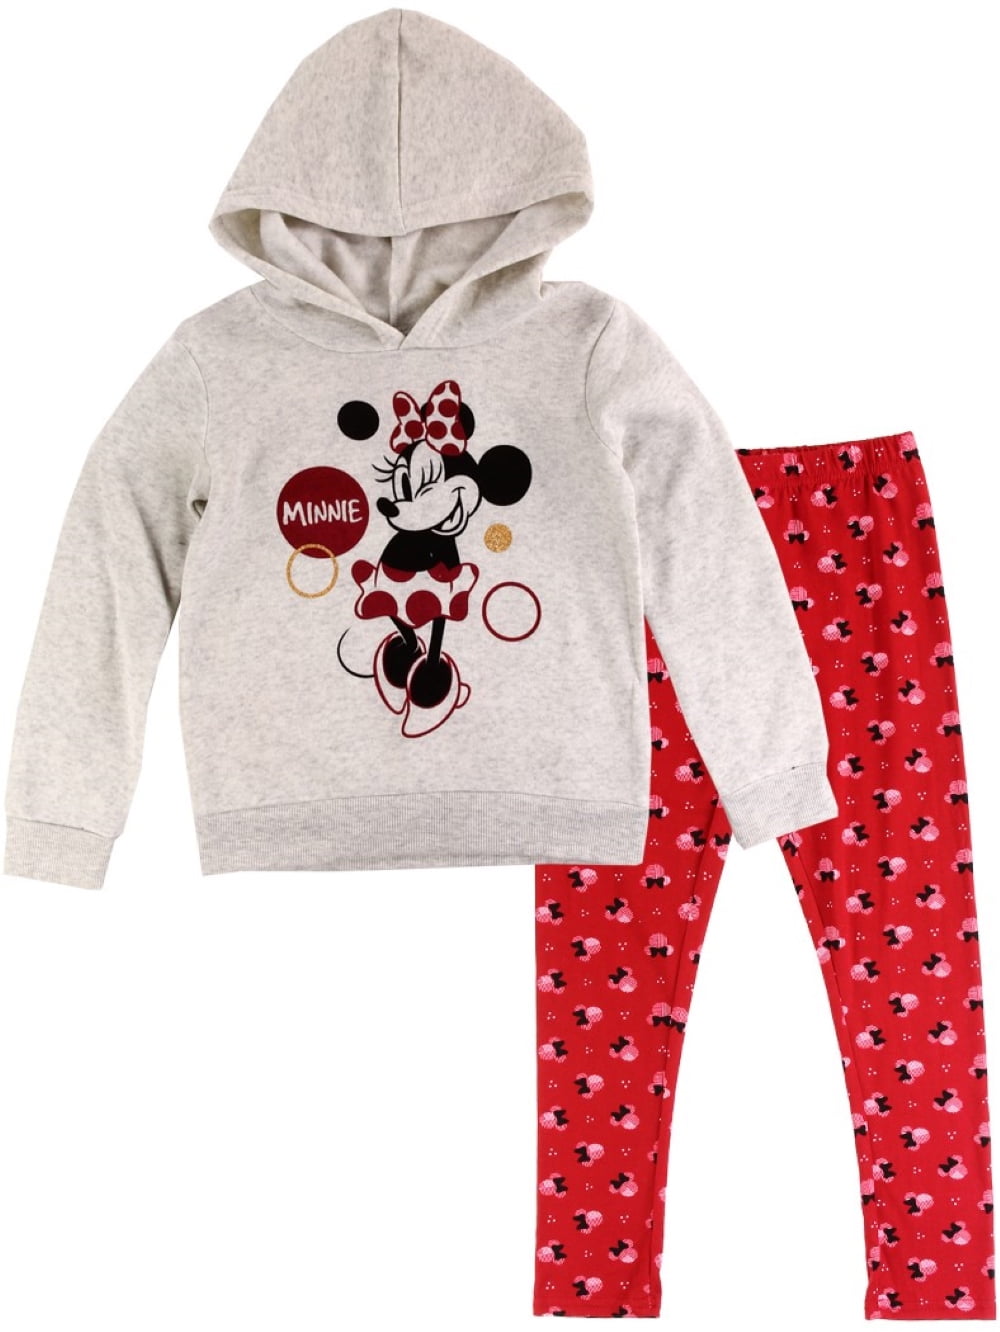 Disney Minnie Mouse Girls Fashion Fleece Pullover Hoodie and Leggings Set